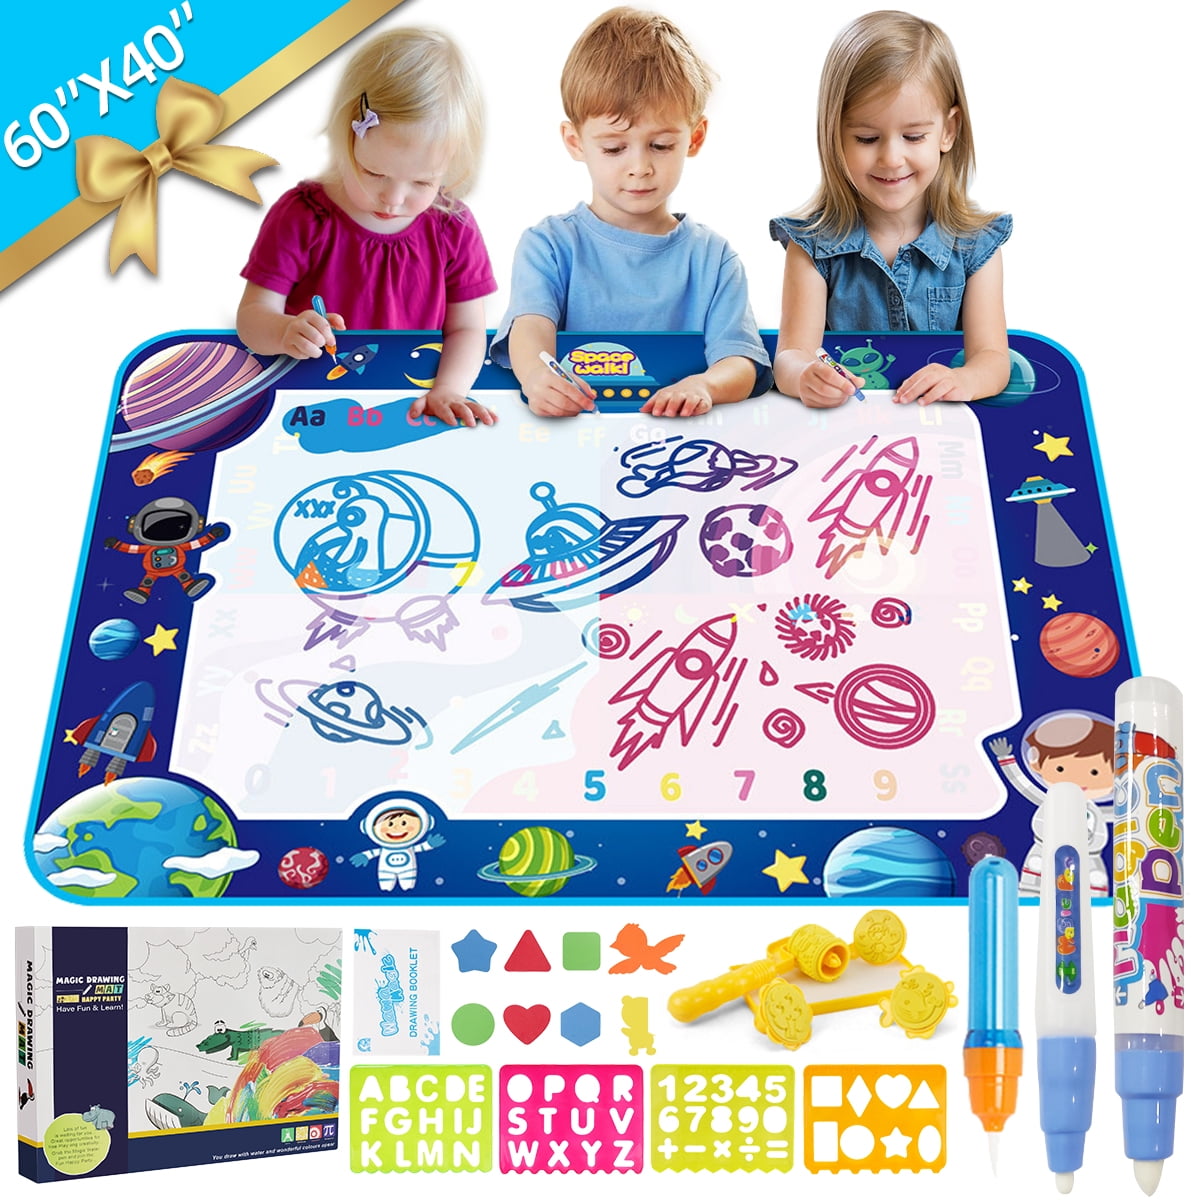 40x32 Inches Luminous Magic Doodle Drawing Mat Glow in the Dark, Extra  Large Water Drawing Mat Toddler Toys Gifts, Paint Writing Color Mat Kids  Toys